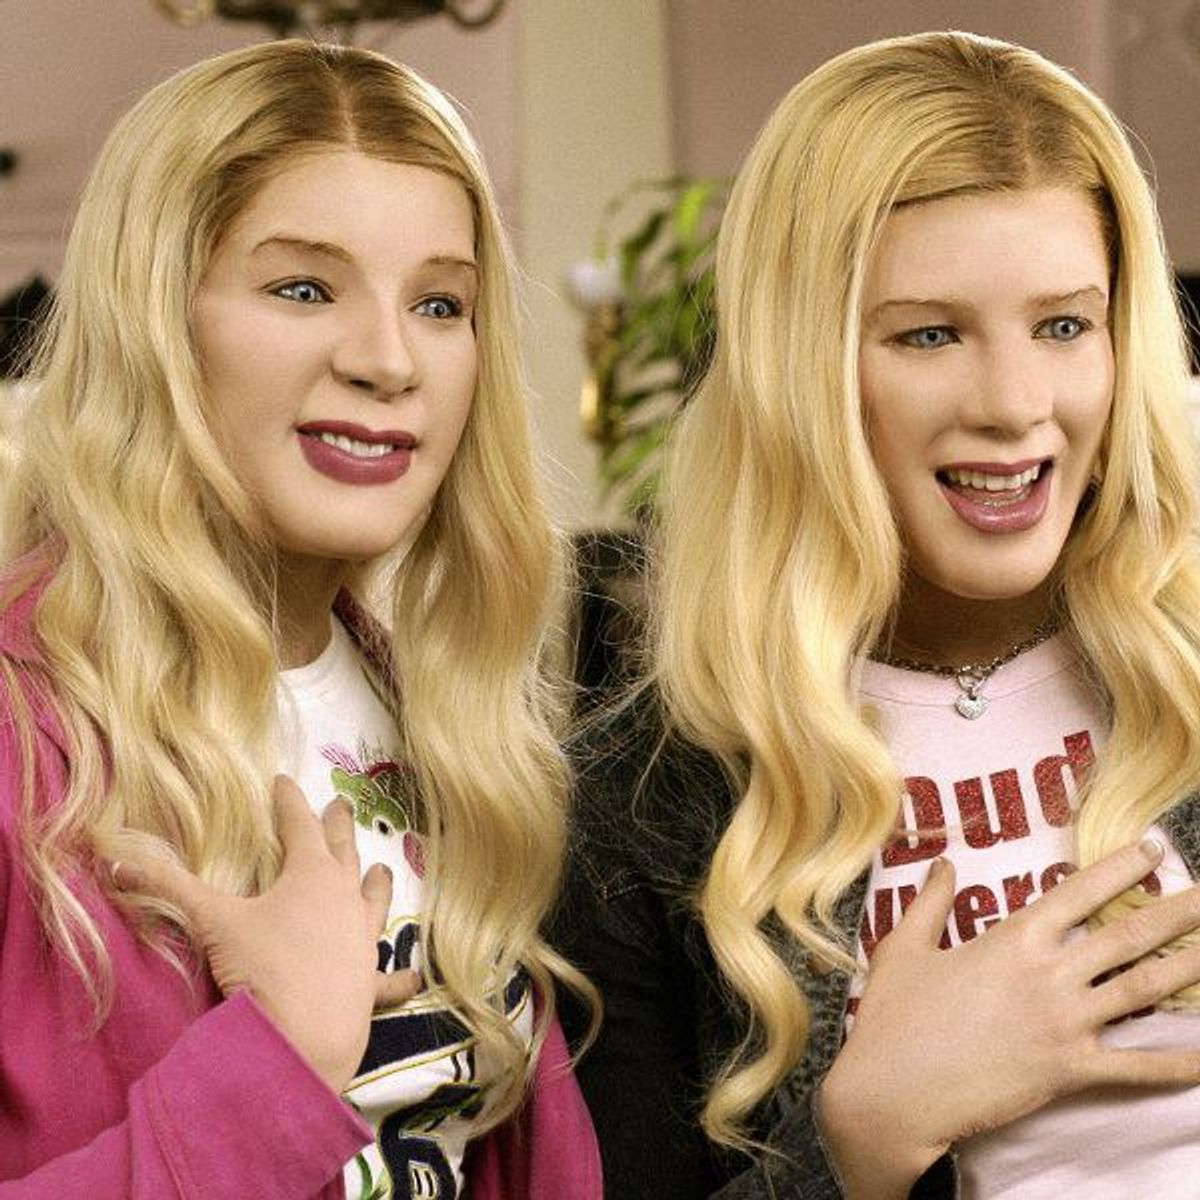 Reasons to watch 'White Chicks'